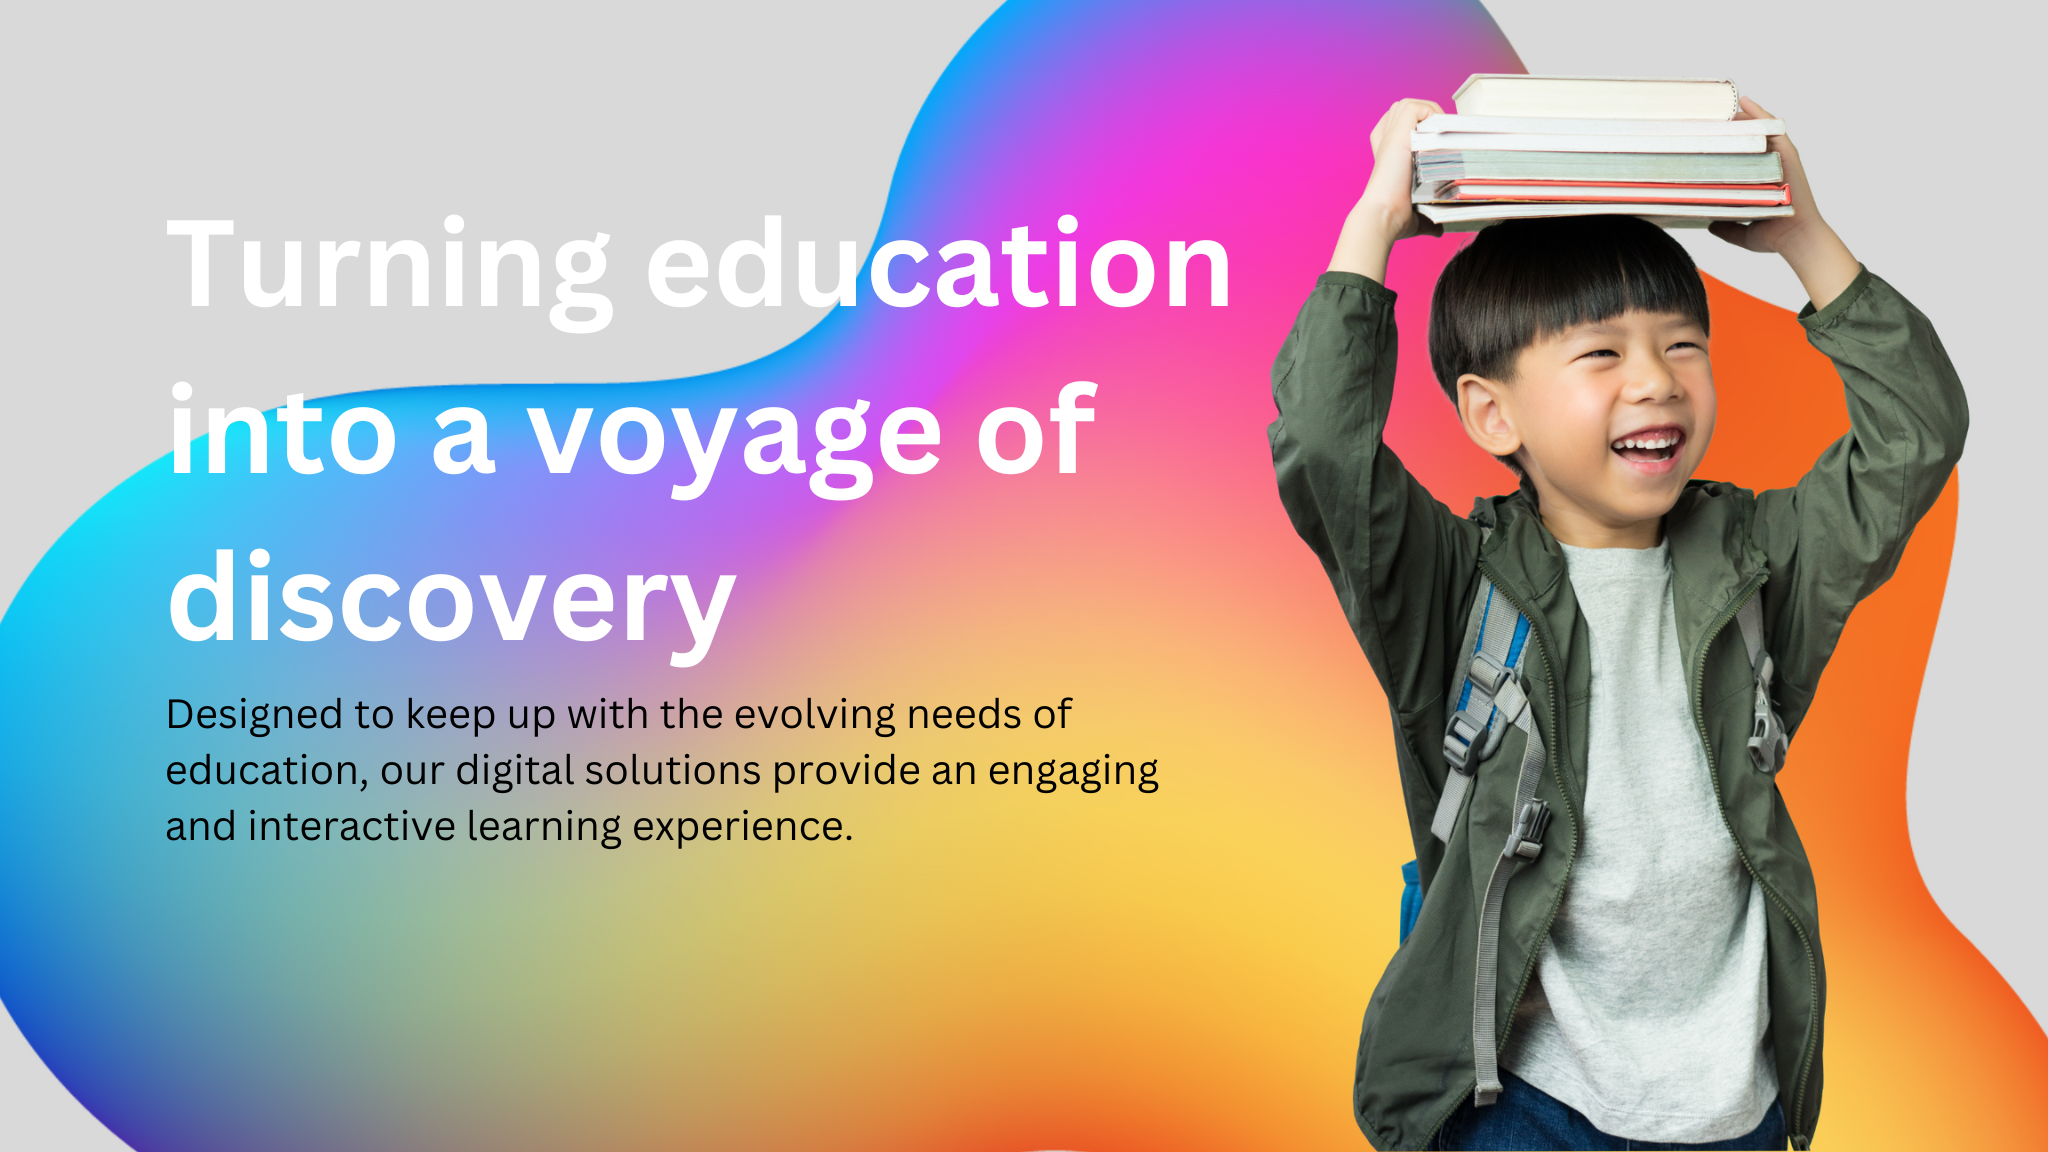 Marshall Cavendish Education introduction Banner on Kalodu. Turning education into a voyage of discovery.